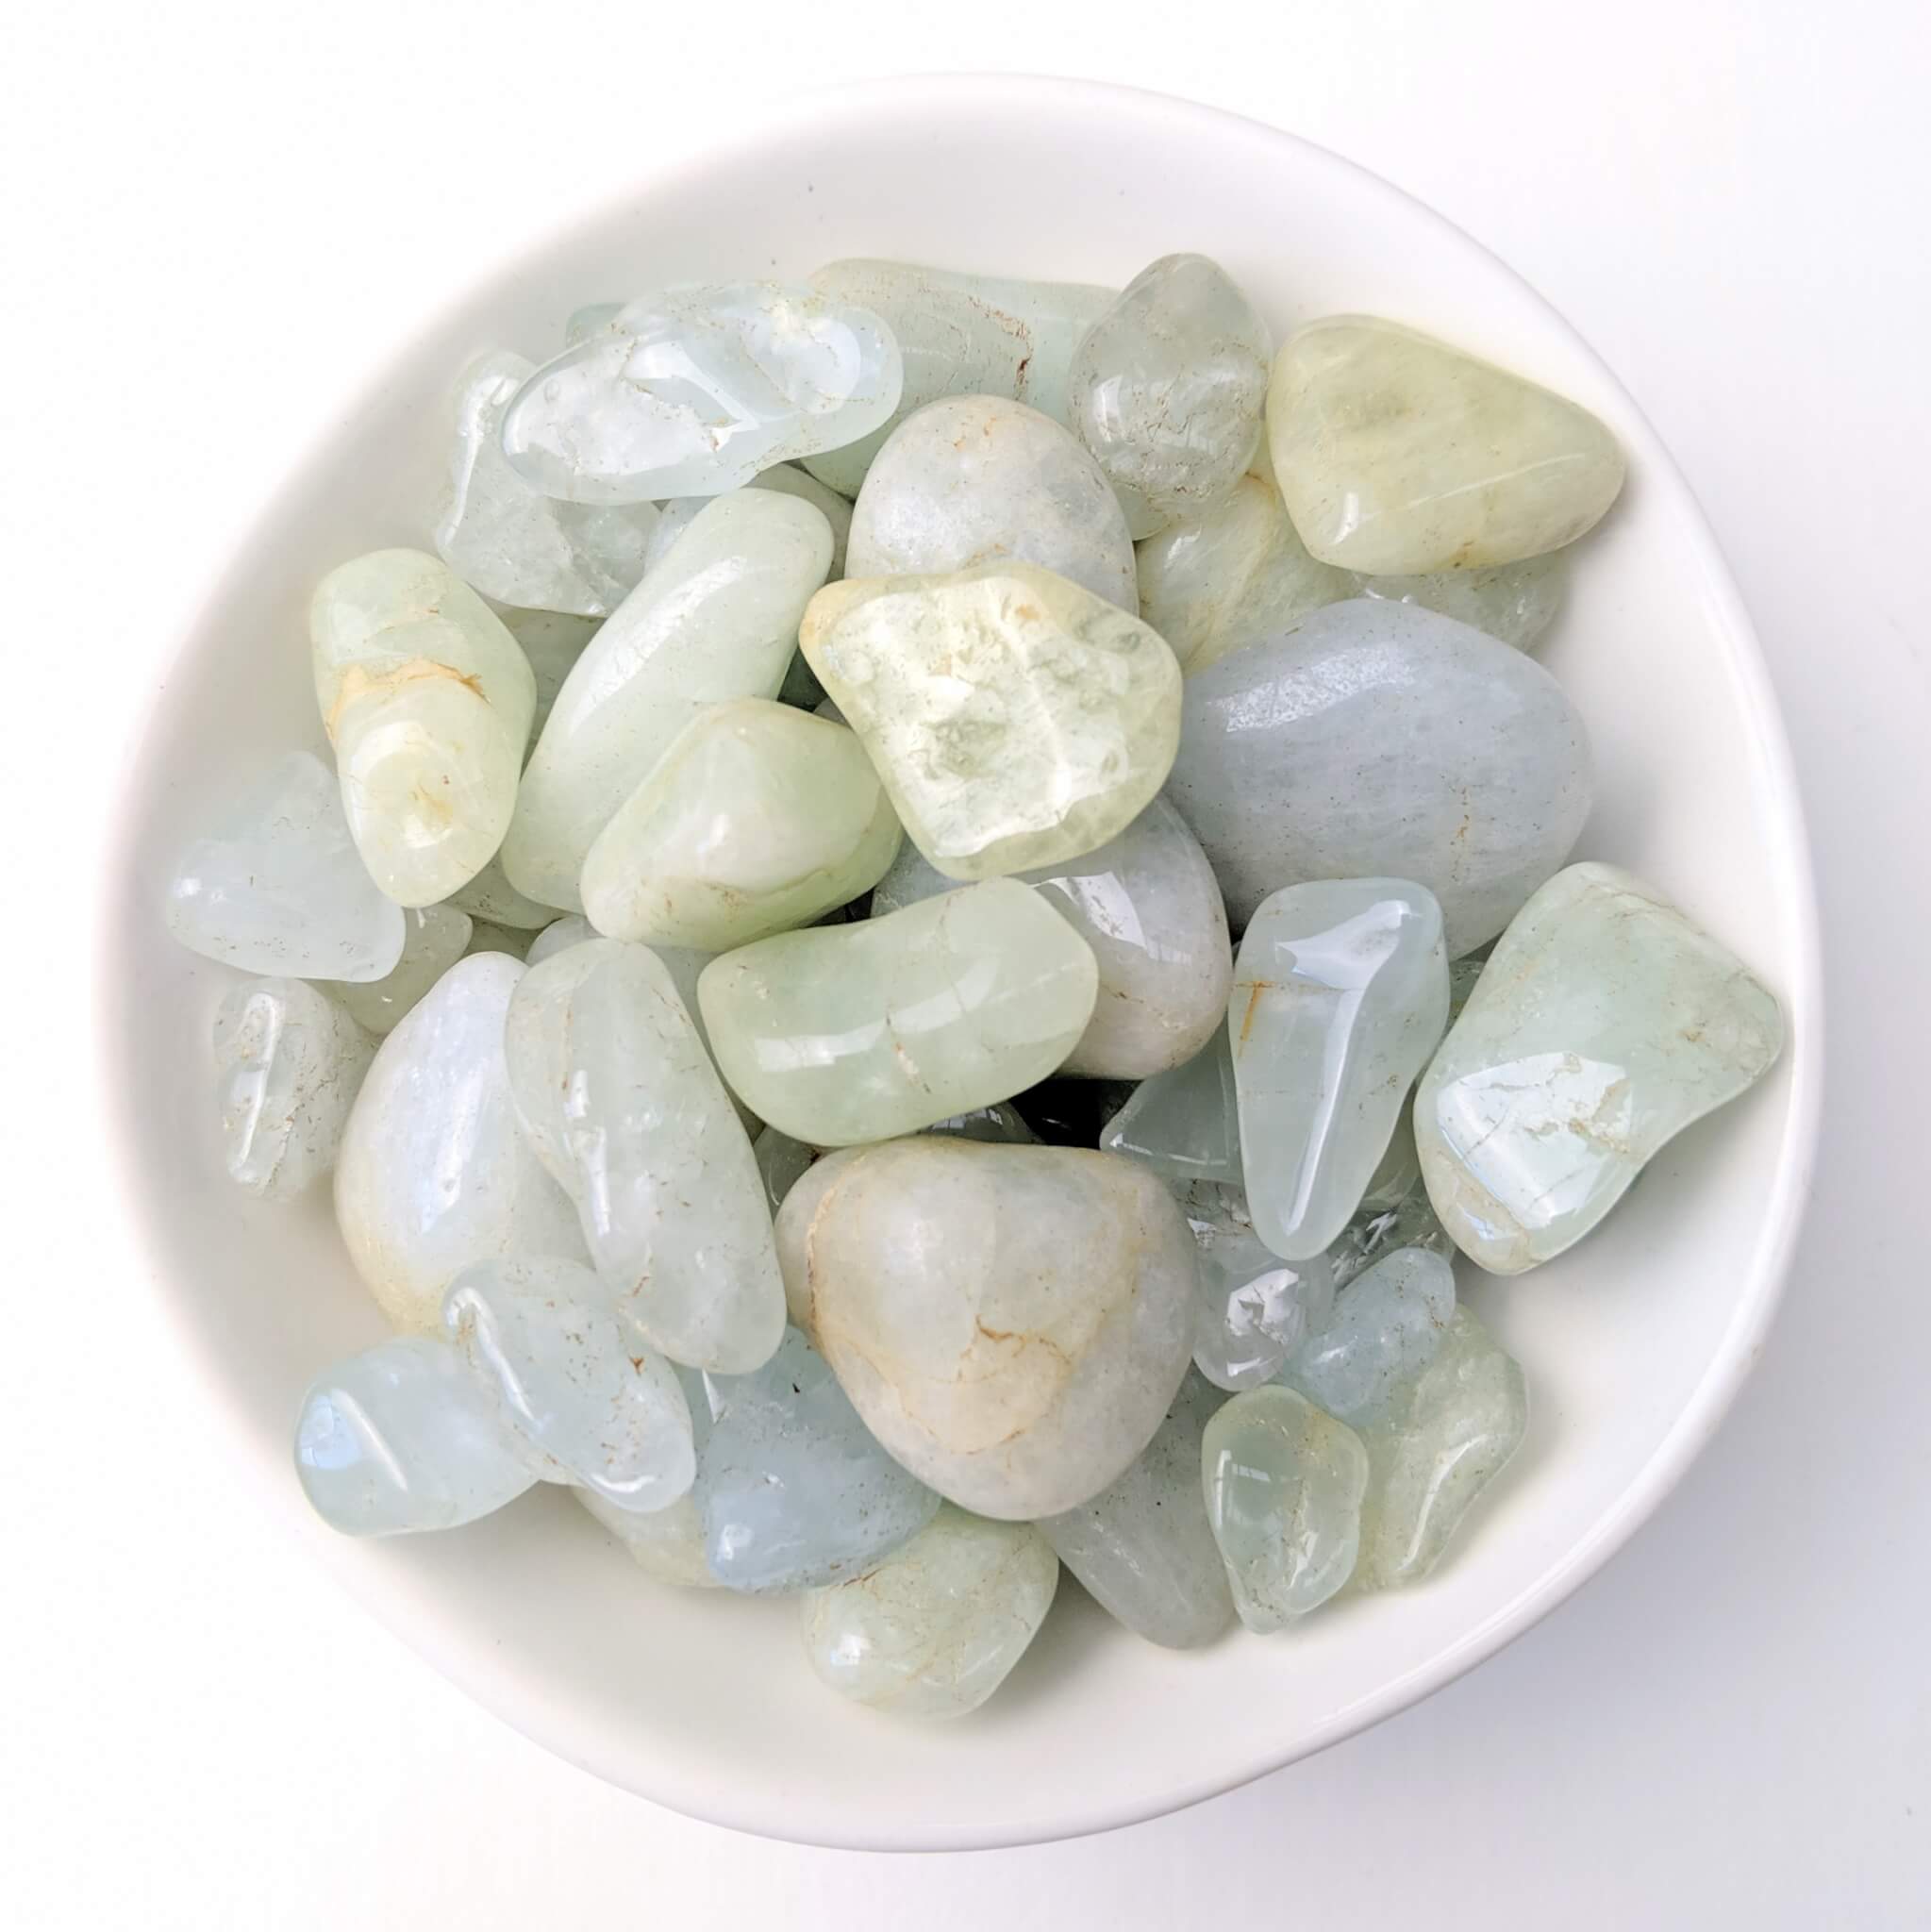 Aquamarine Crystal Tumble Stones in a White Bowl Top View